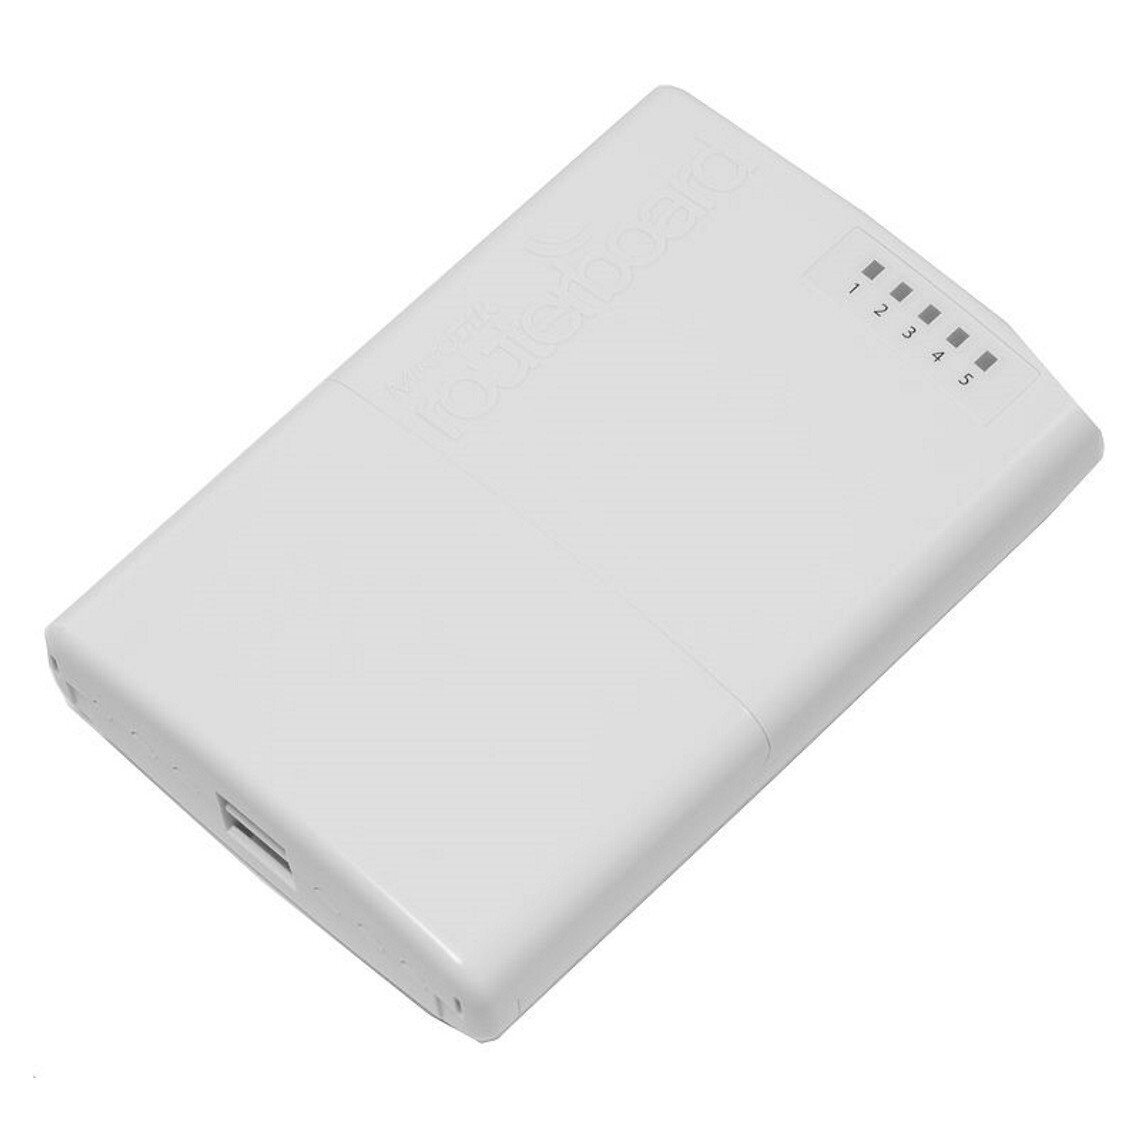 Маршрутизатор MikroTik PowerBOX 5xFE/PoE, RouterOS L4, outdoor case (RB750P-PBR2) фото 1